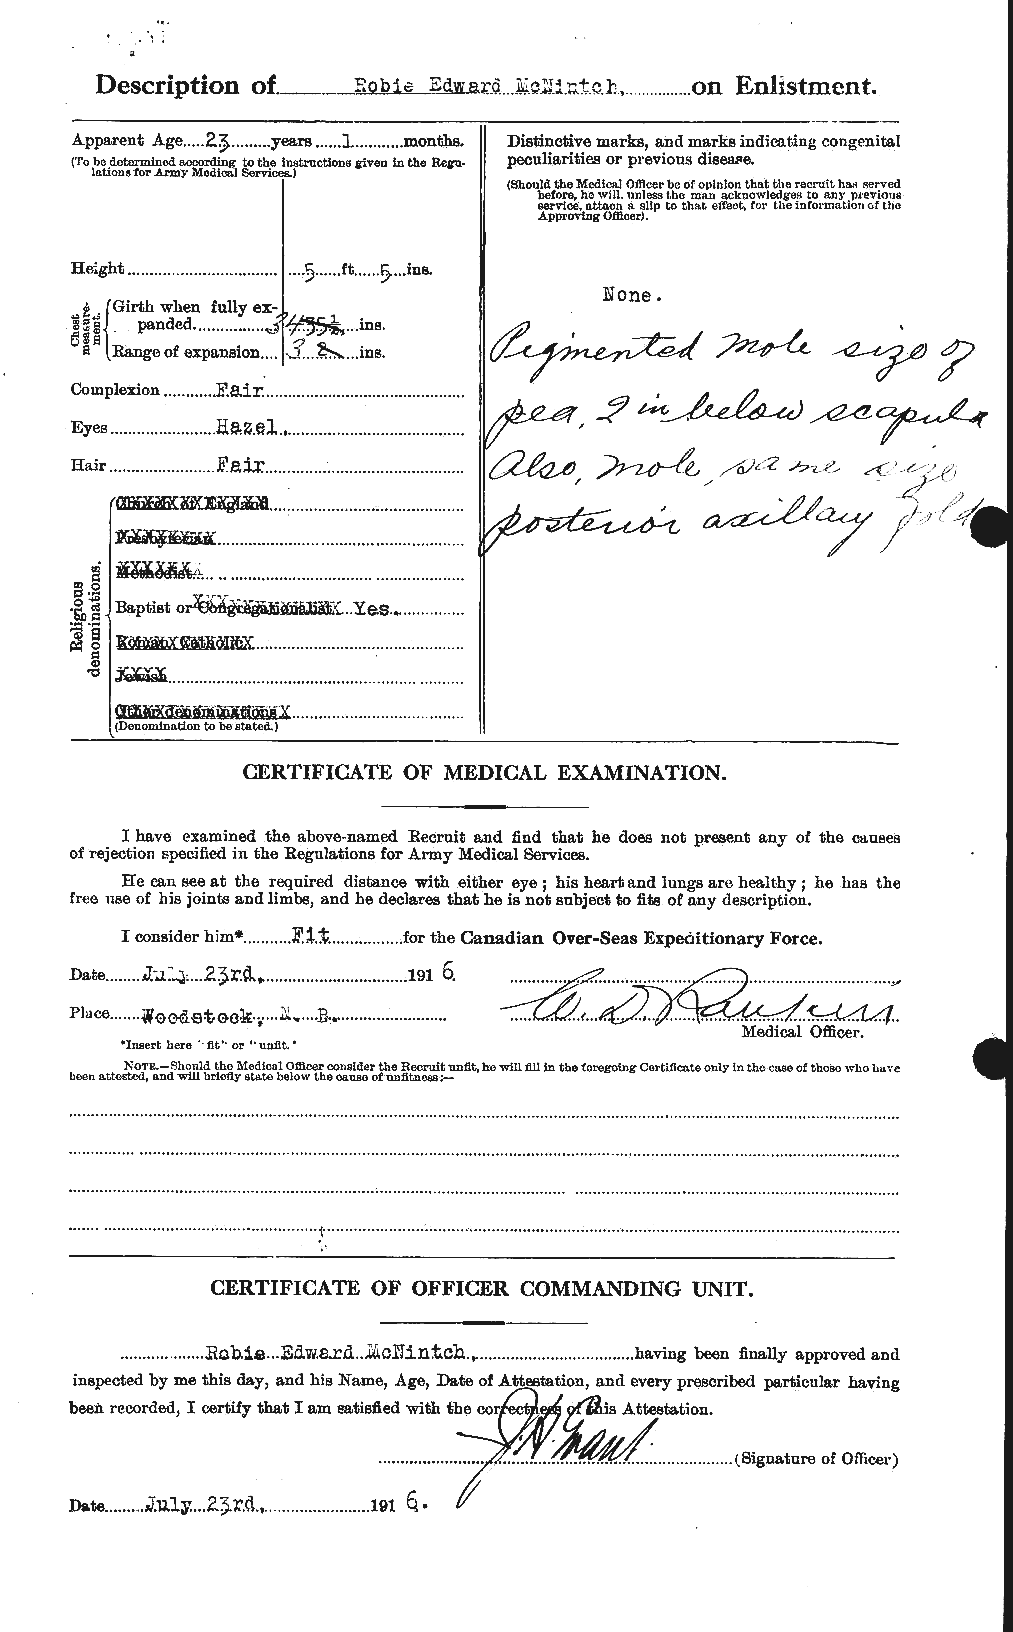 Personnel Records of the First World War - CEF 539269b